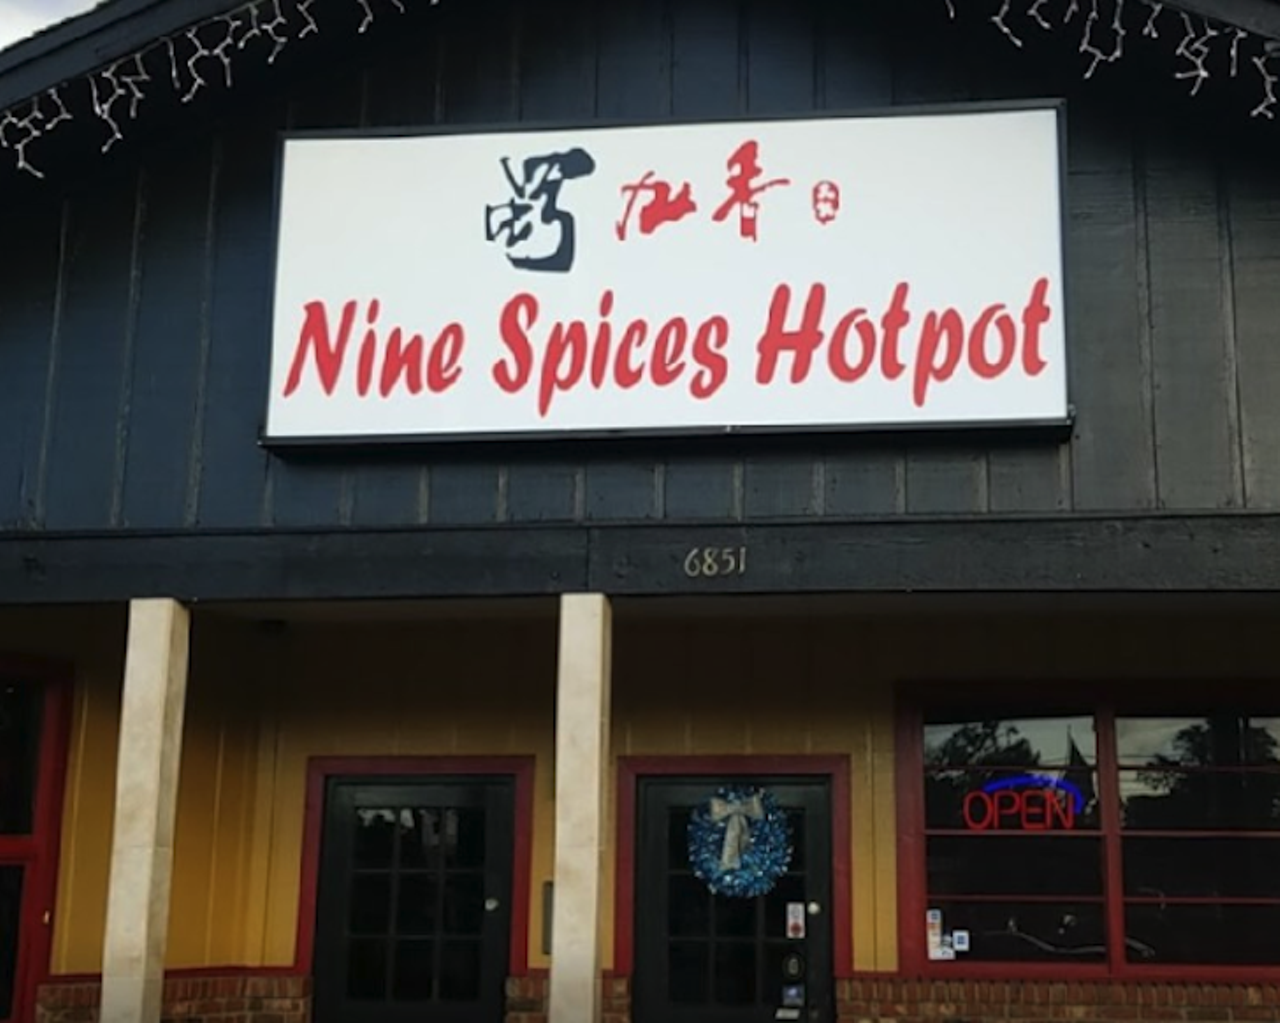 Nine Spices Hot Pot & Korean BBQ   
6851 66th St N, Pinellas Park
All you can eat hotpot and korean barbecue. Stretchy pants are a must to get the most bang for your buck. Time to venture out of your comfort zone for some good eats.
Photo via  Nine Spices Hot Pot & Korean BBQ/ Facebook